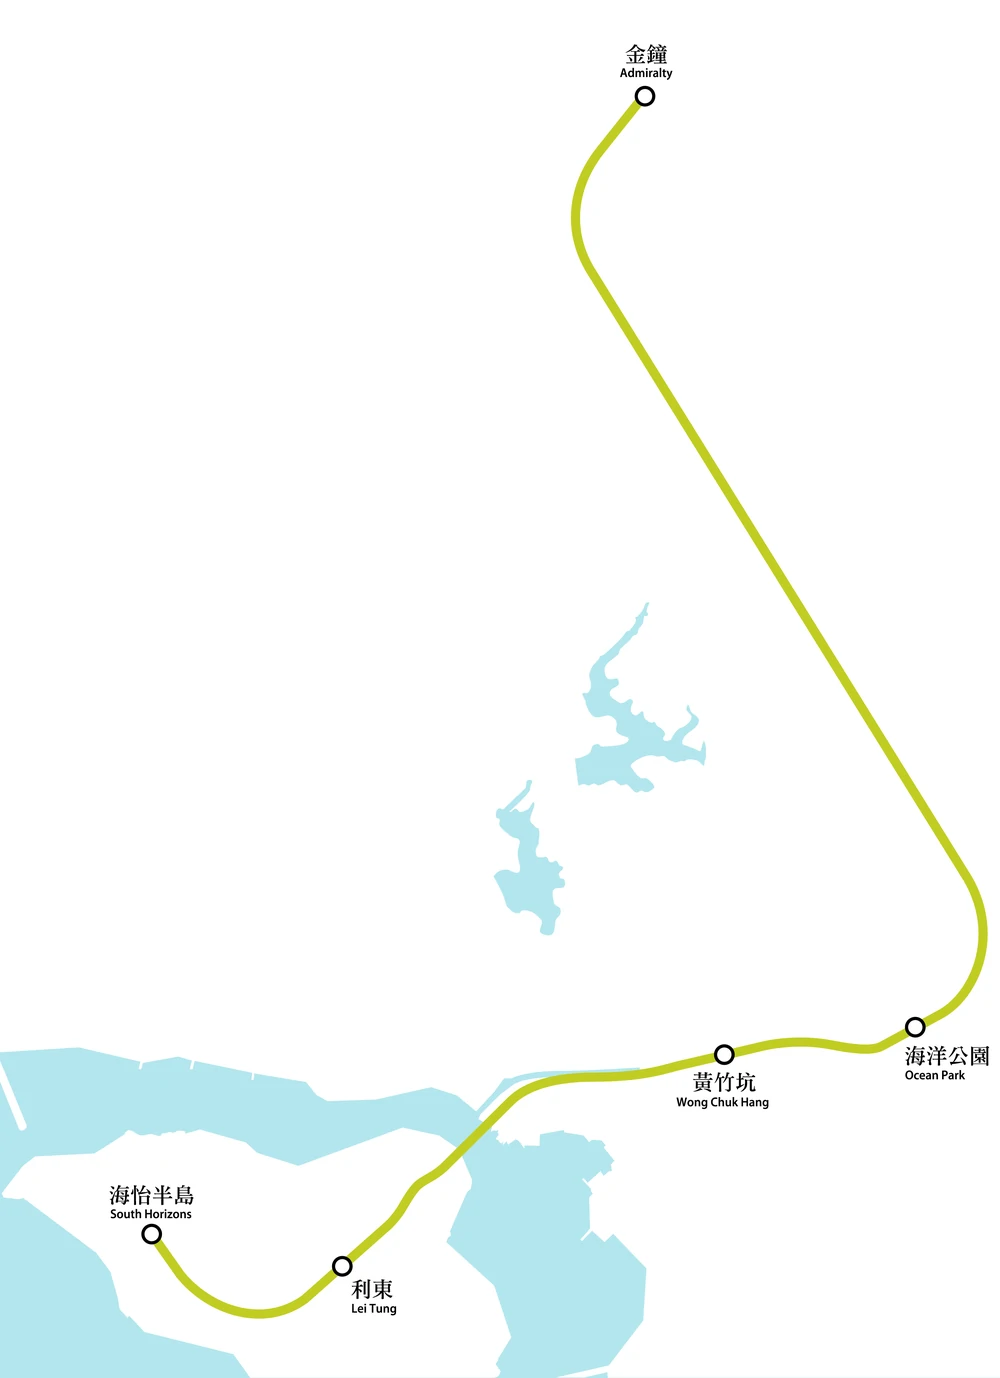 South Island Line Project